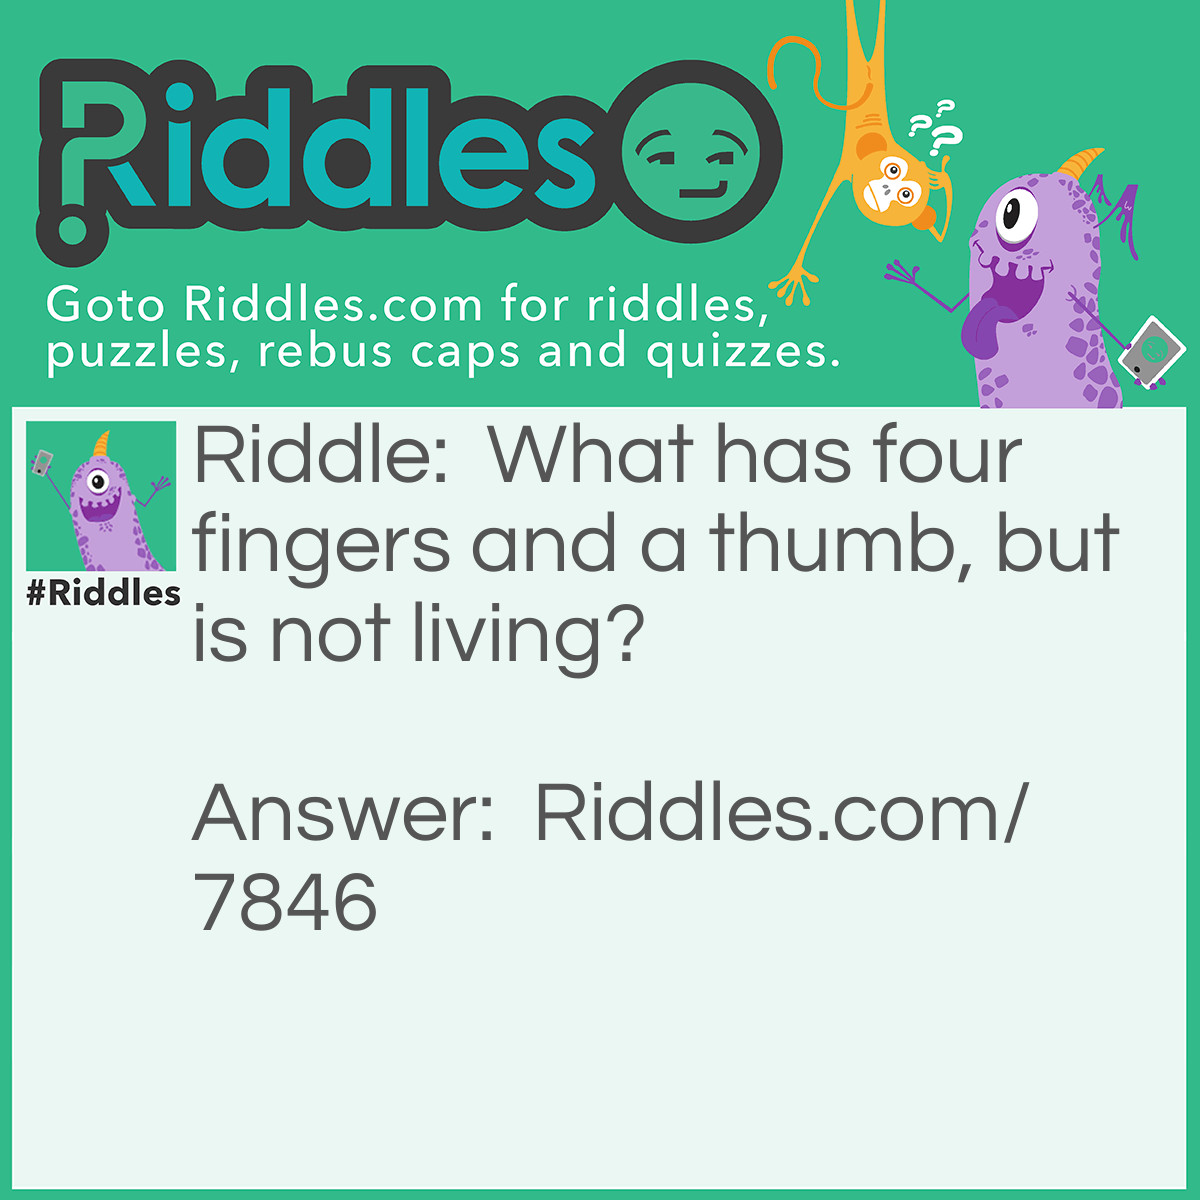 Riddle: What has four fingers and a thumb, but is not living? Answer: A Glove.